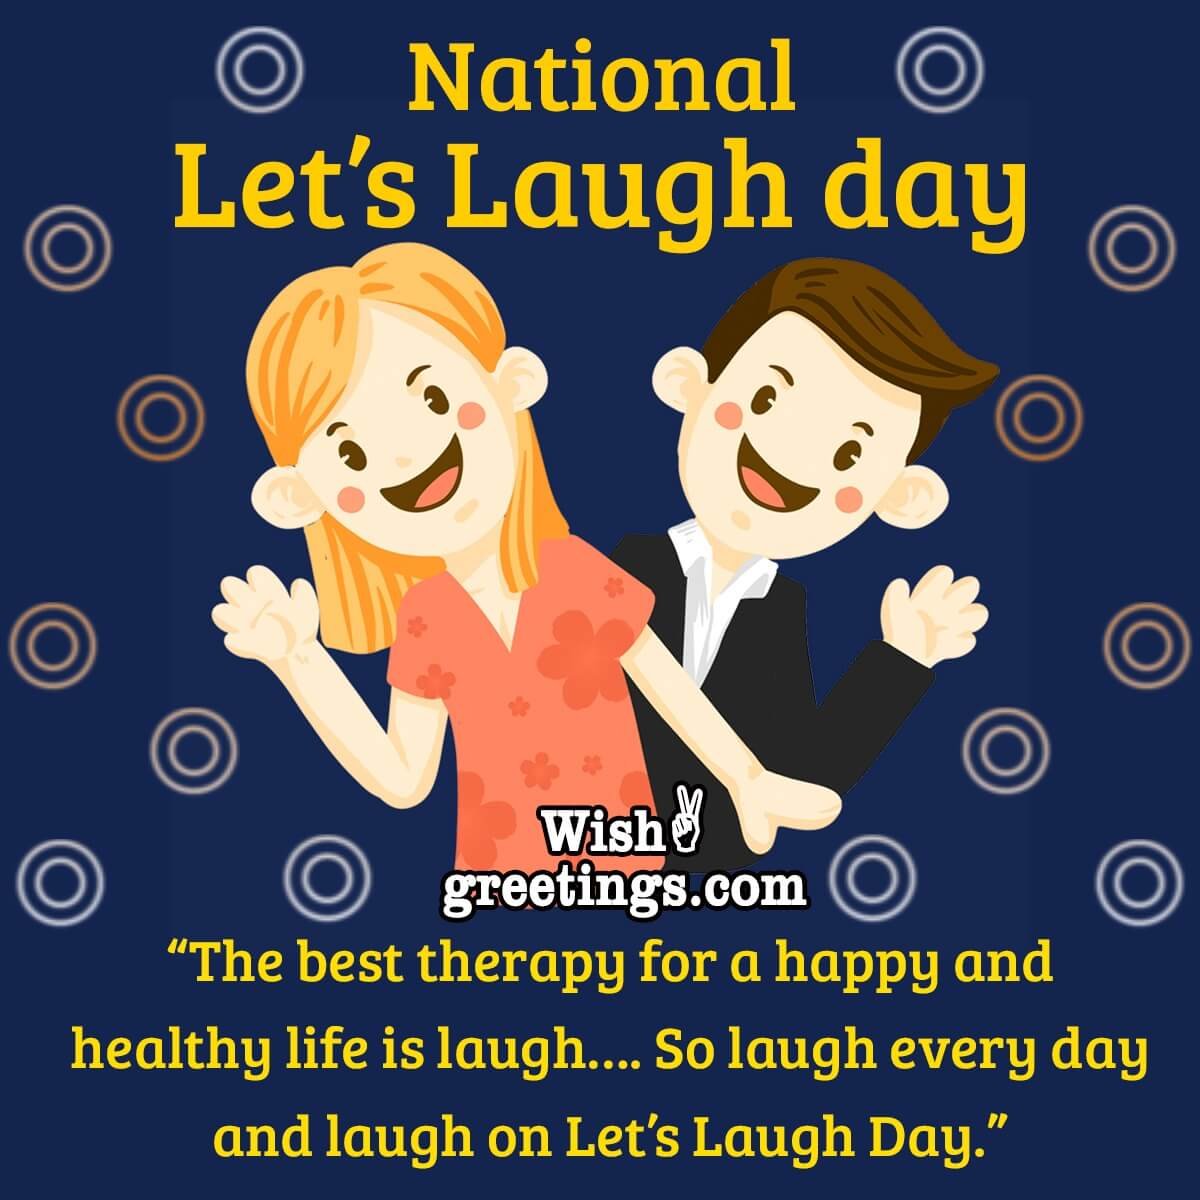 National Let’s Laugh Day